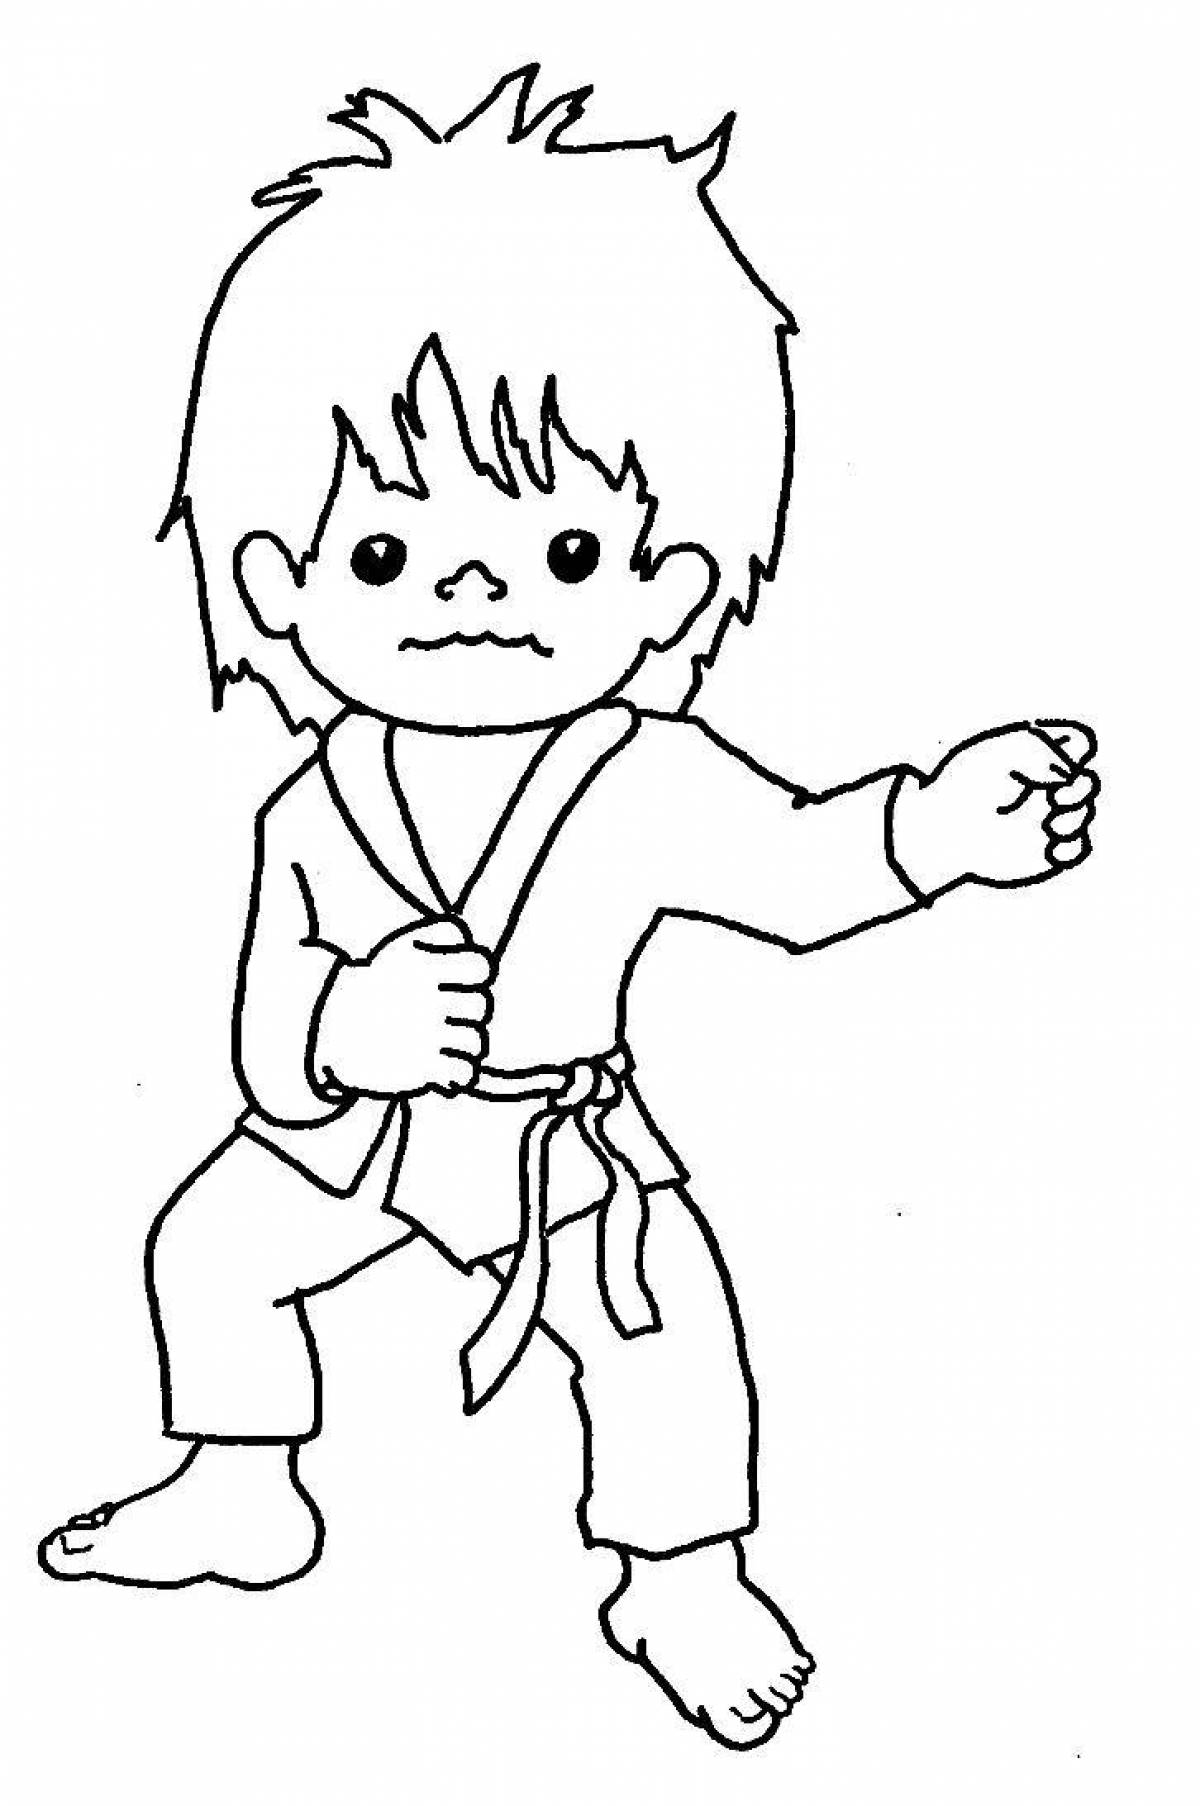 Great judo coloring book for kids